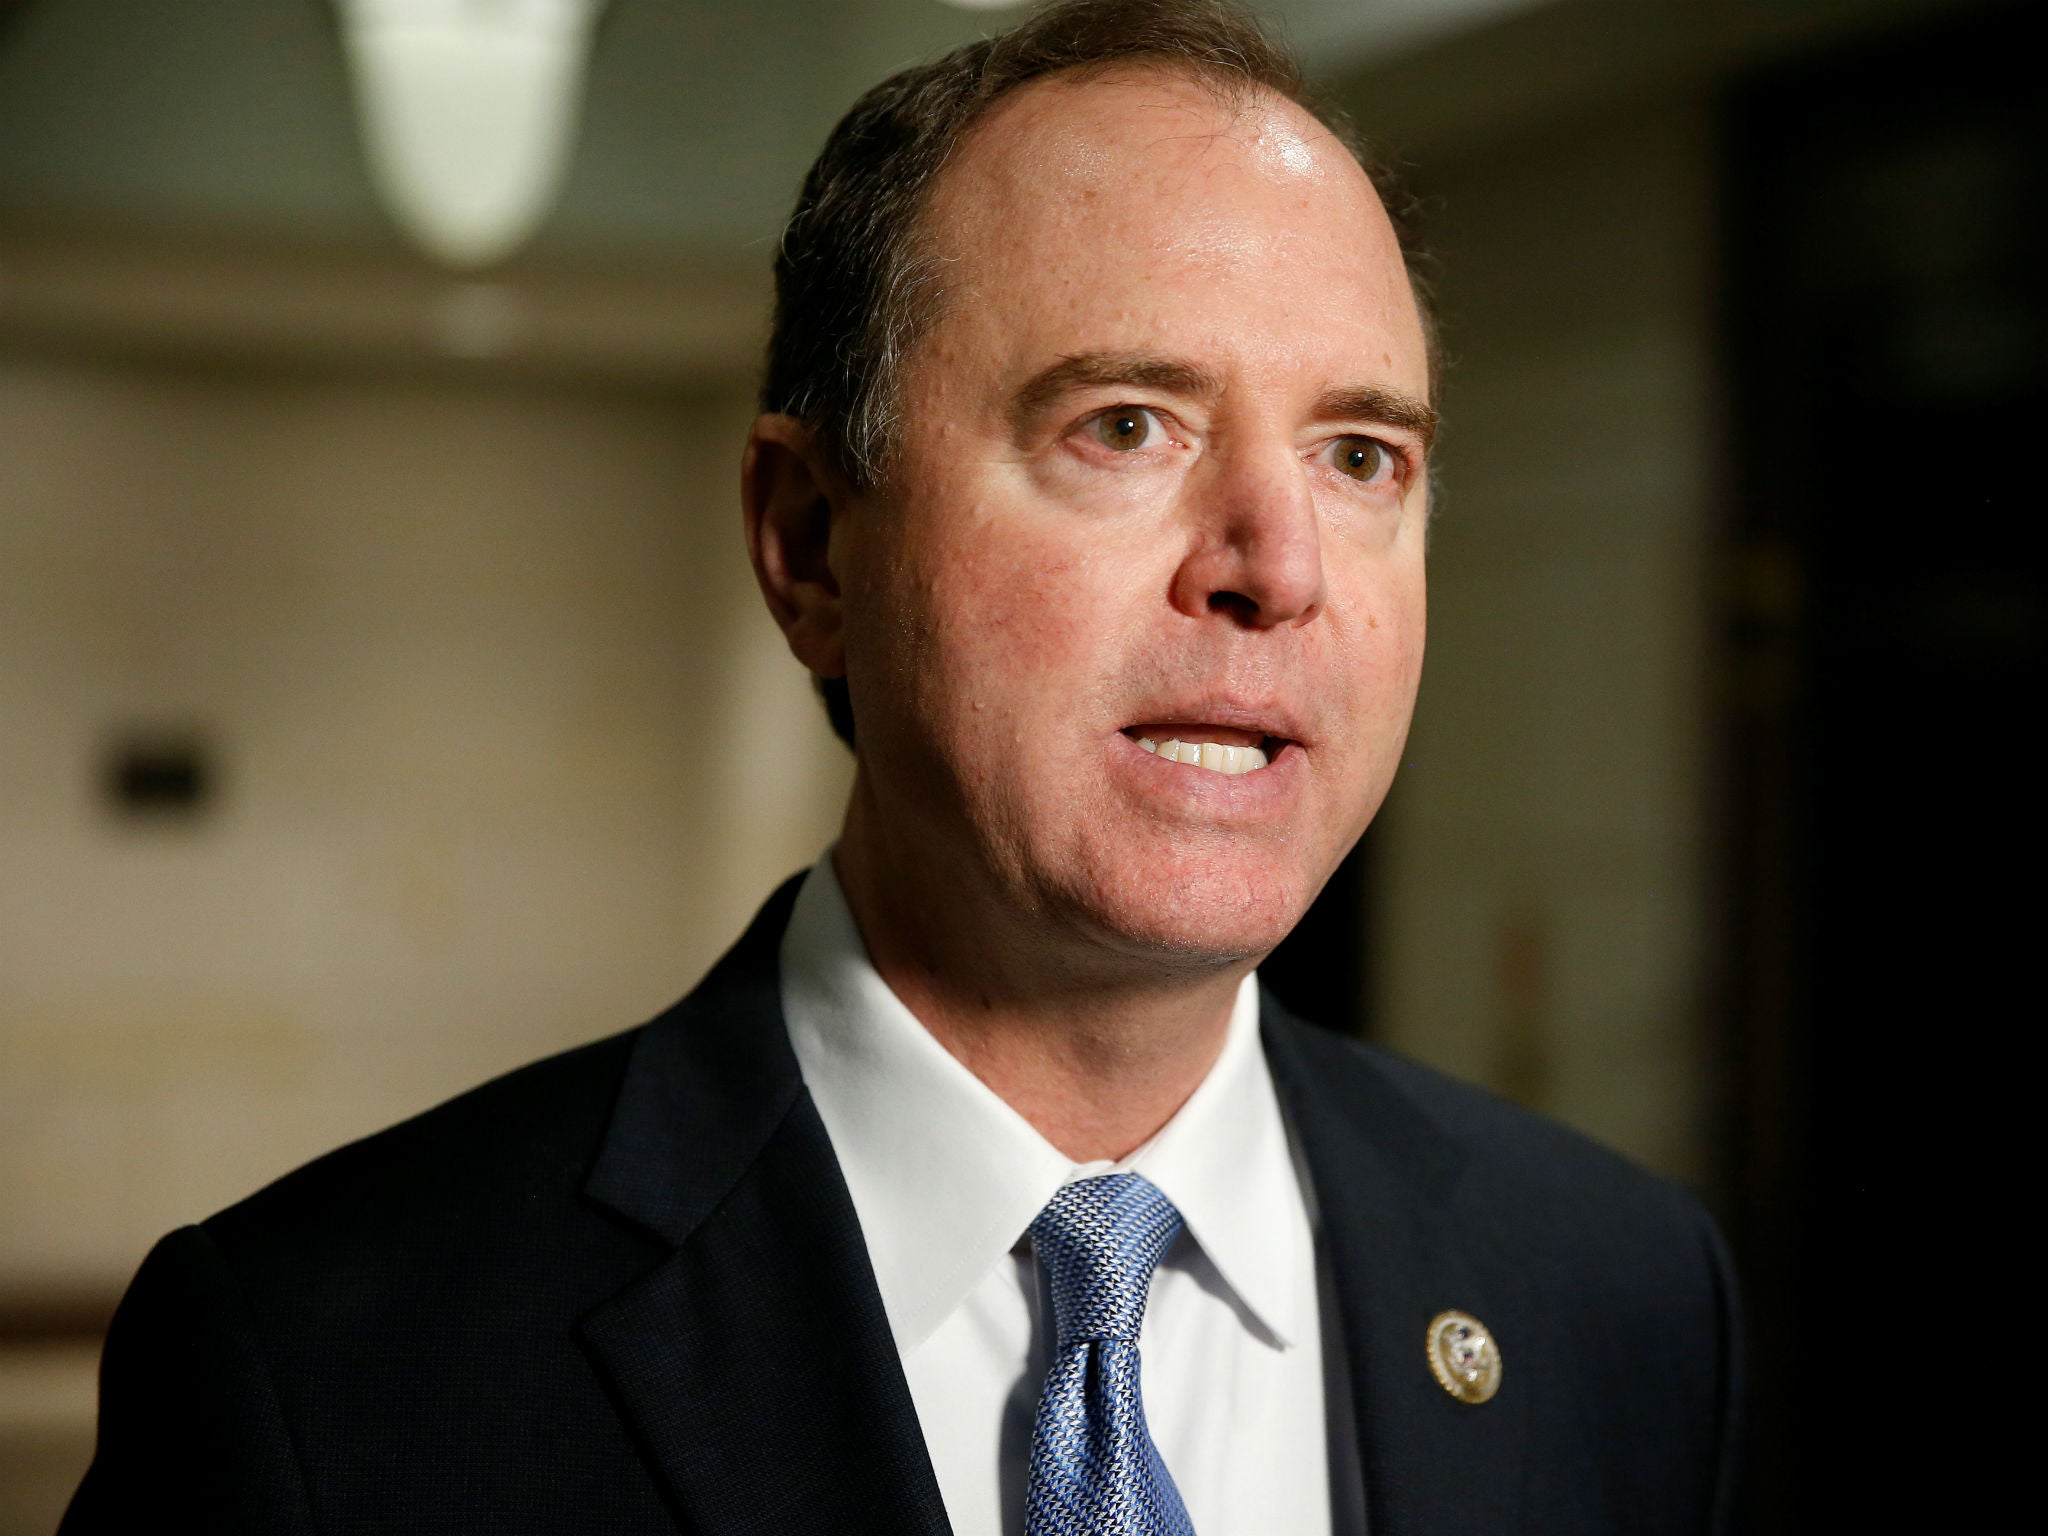 Adam Schiff has called Devin Nunes' memo a set of "distorted talking points" drafted by Republicans